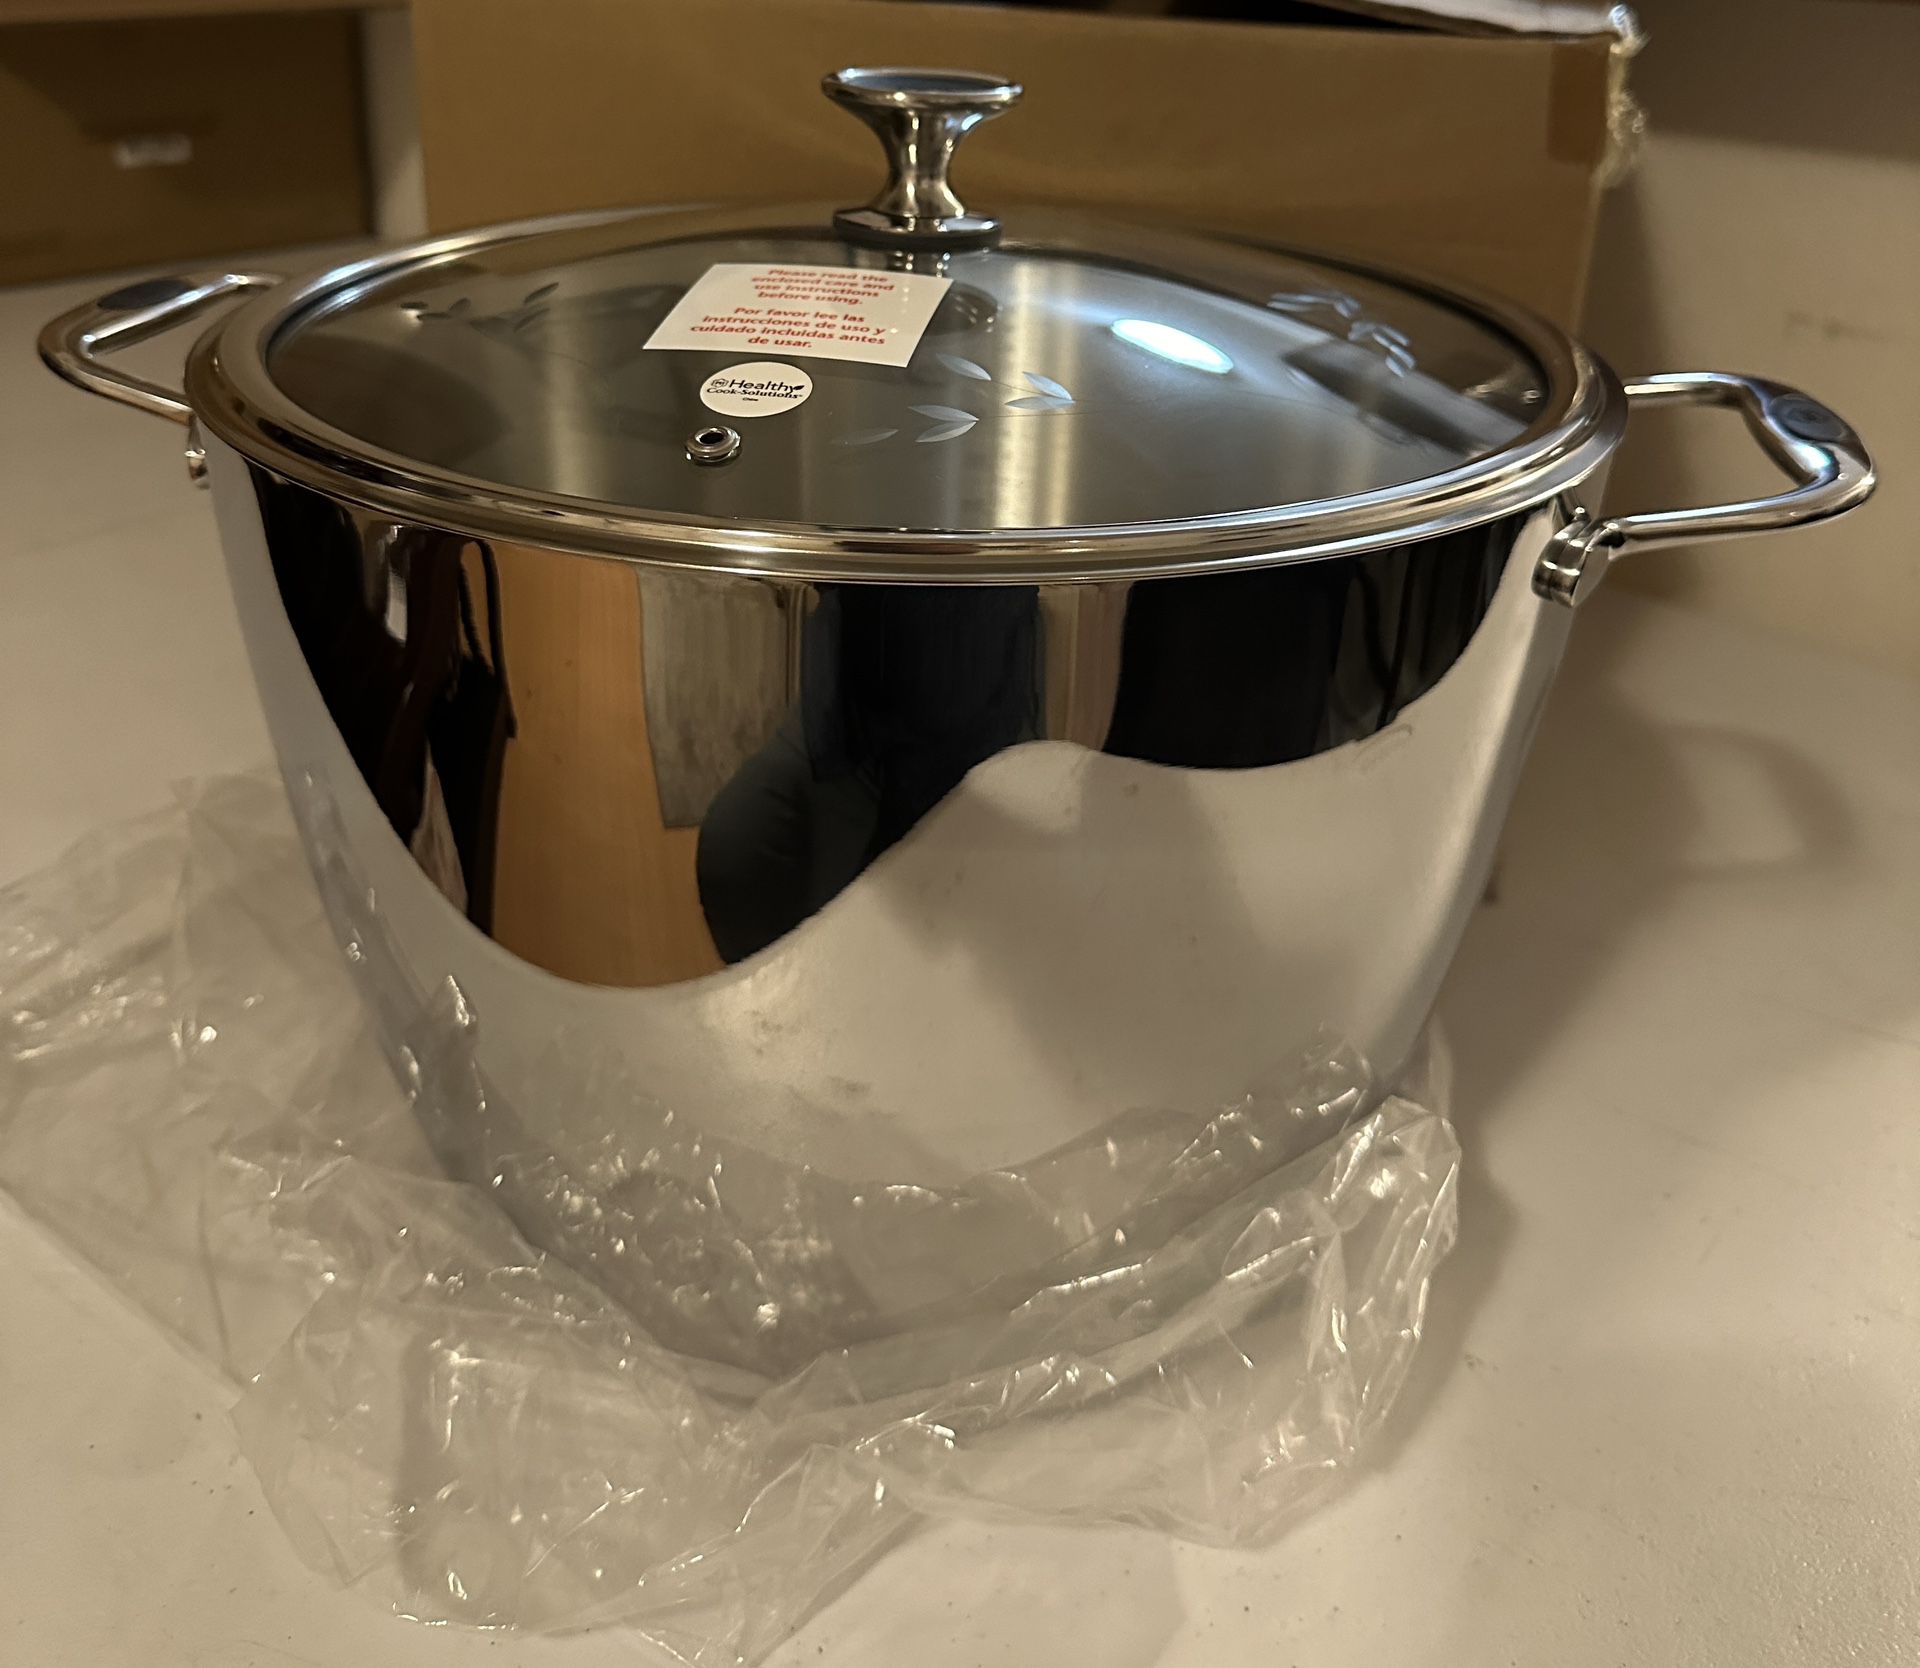 Princess House 12 QT Healthy Cook-Solutions Stockpot 